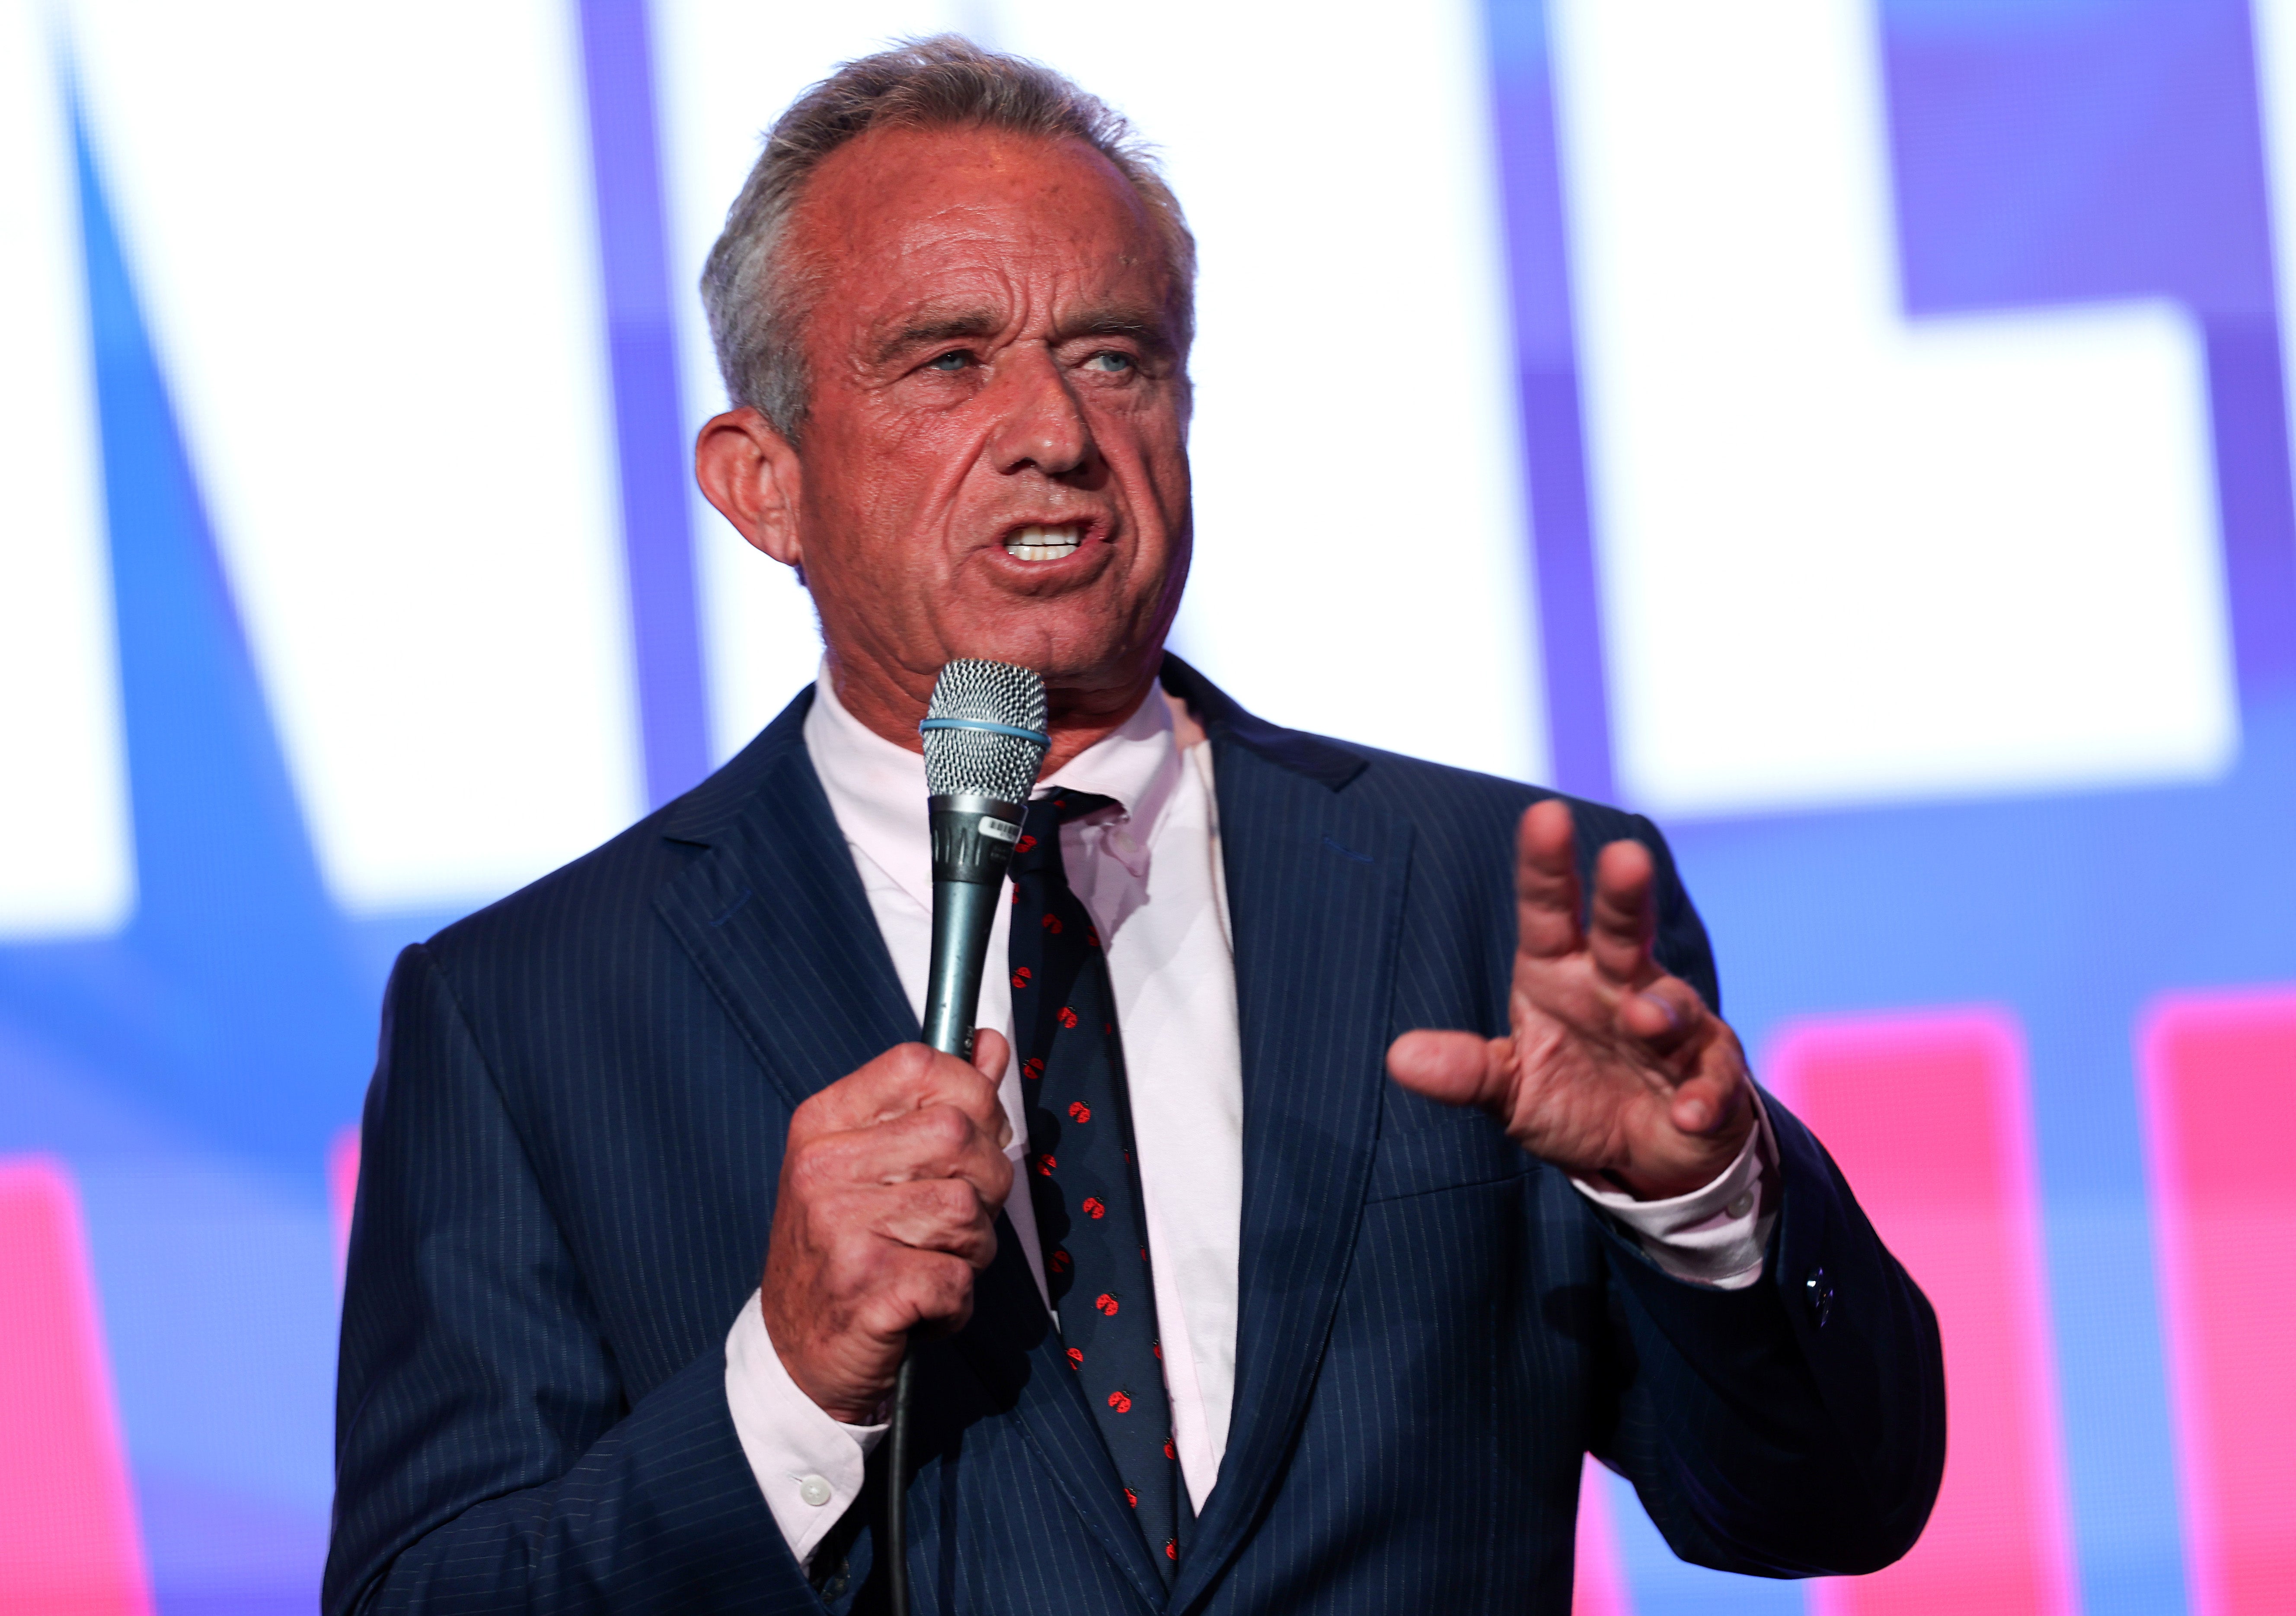 Robert F Kennedy Jr has defended himself after allegations he sexually abused a babysitter at his home in 1998